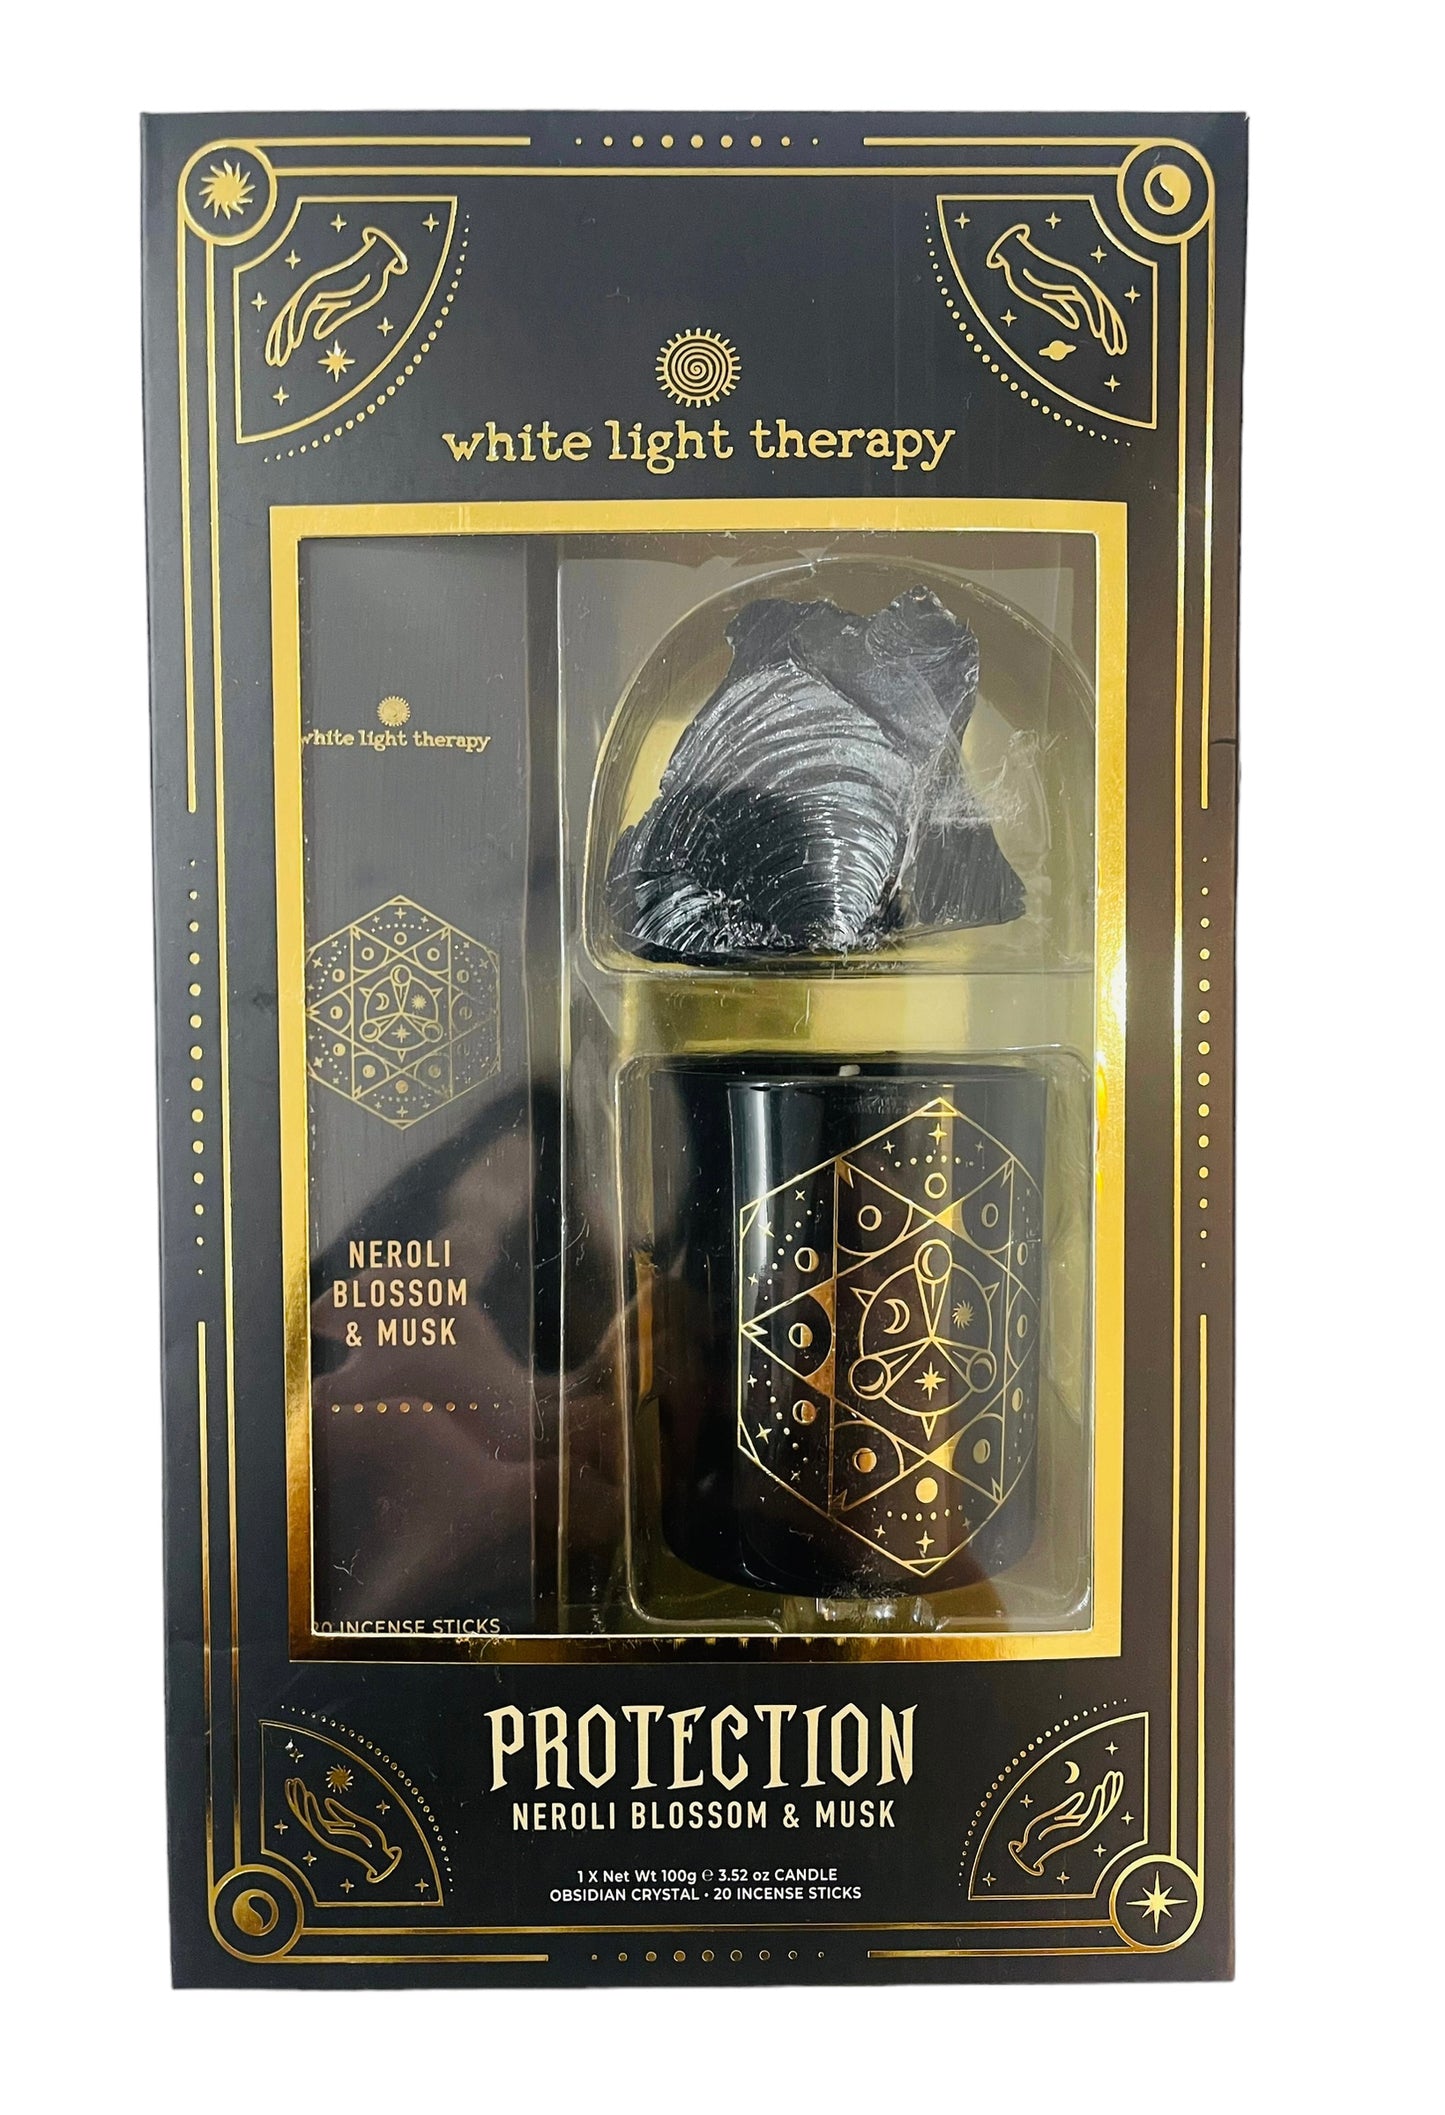 Protection (White Light Therapy).